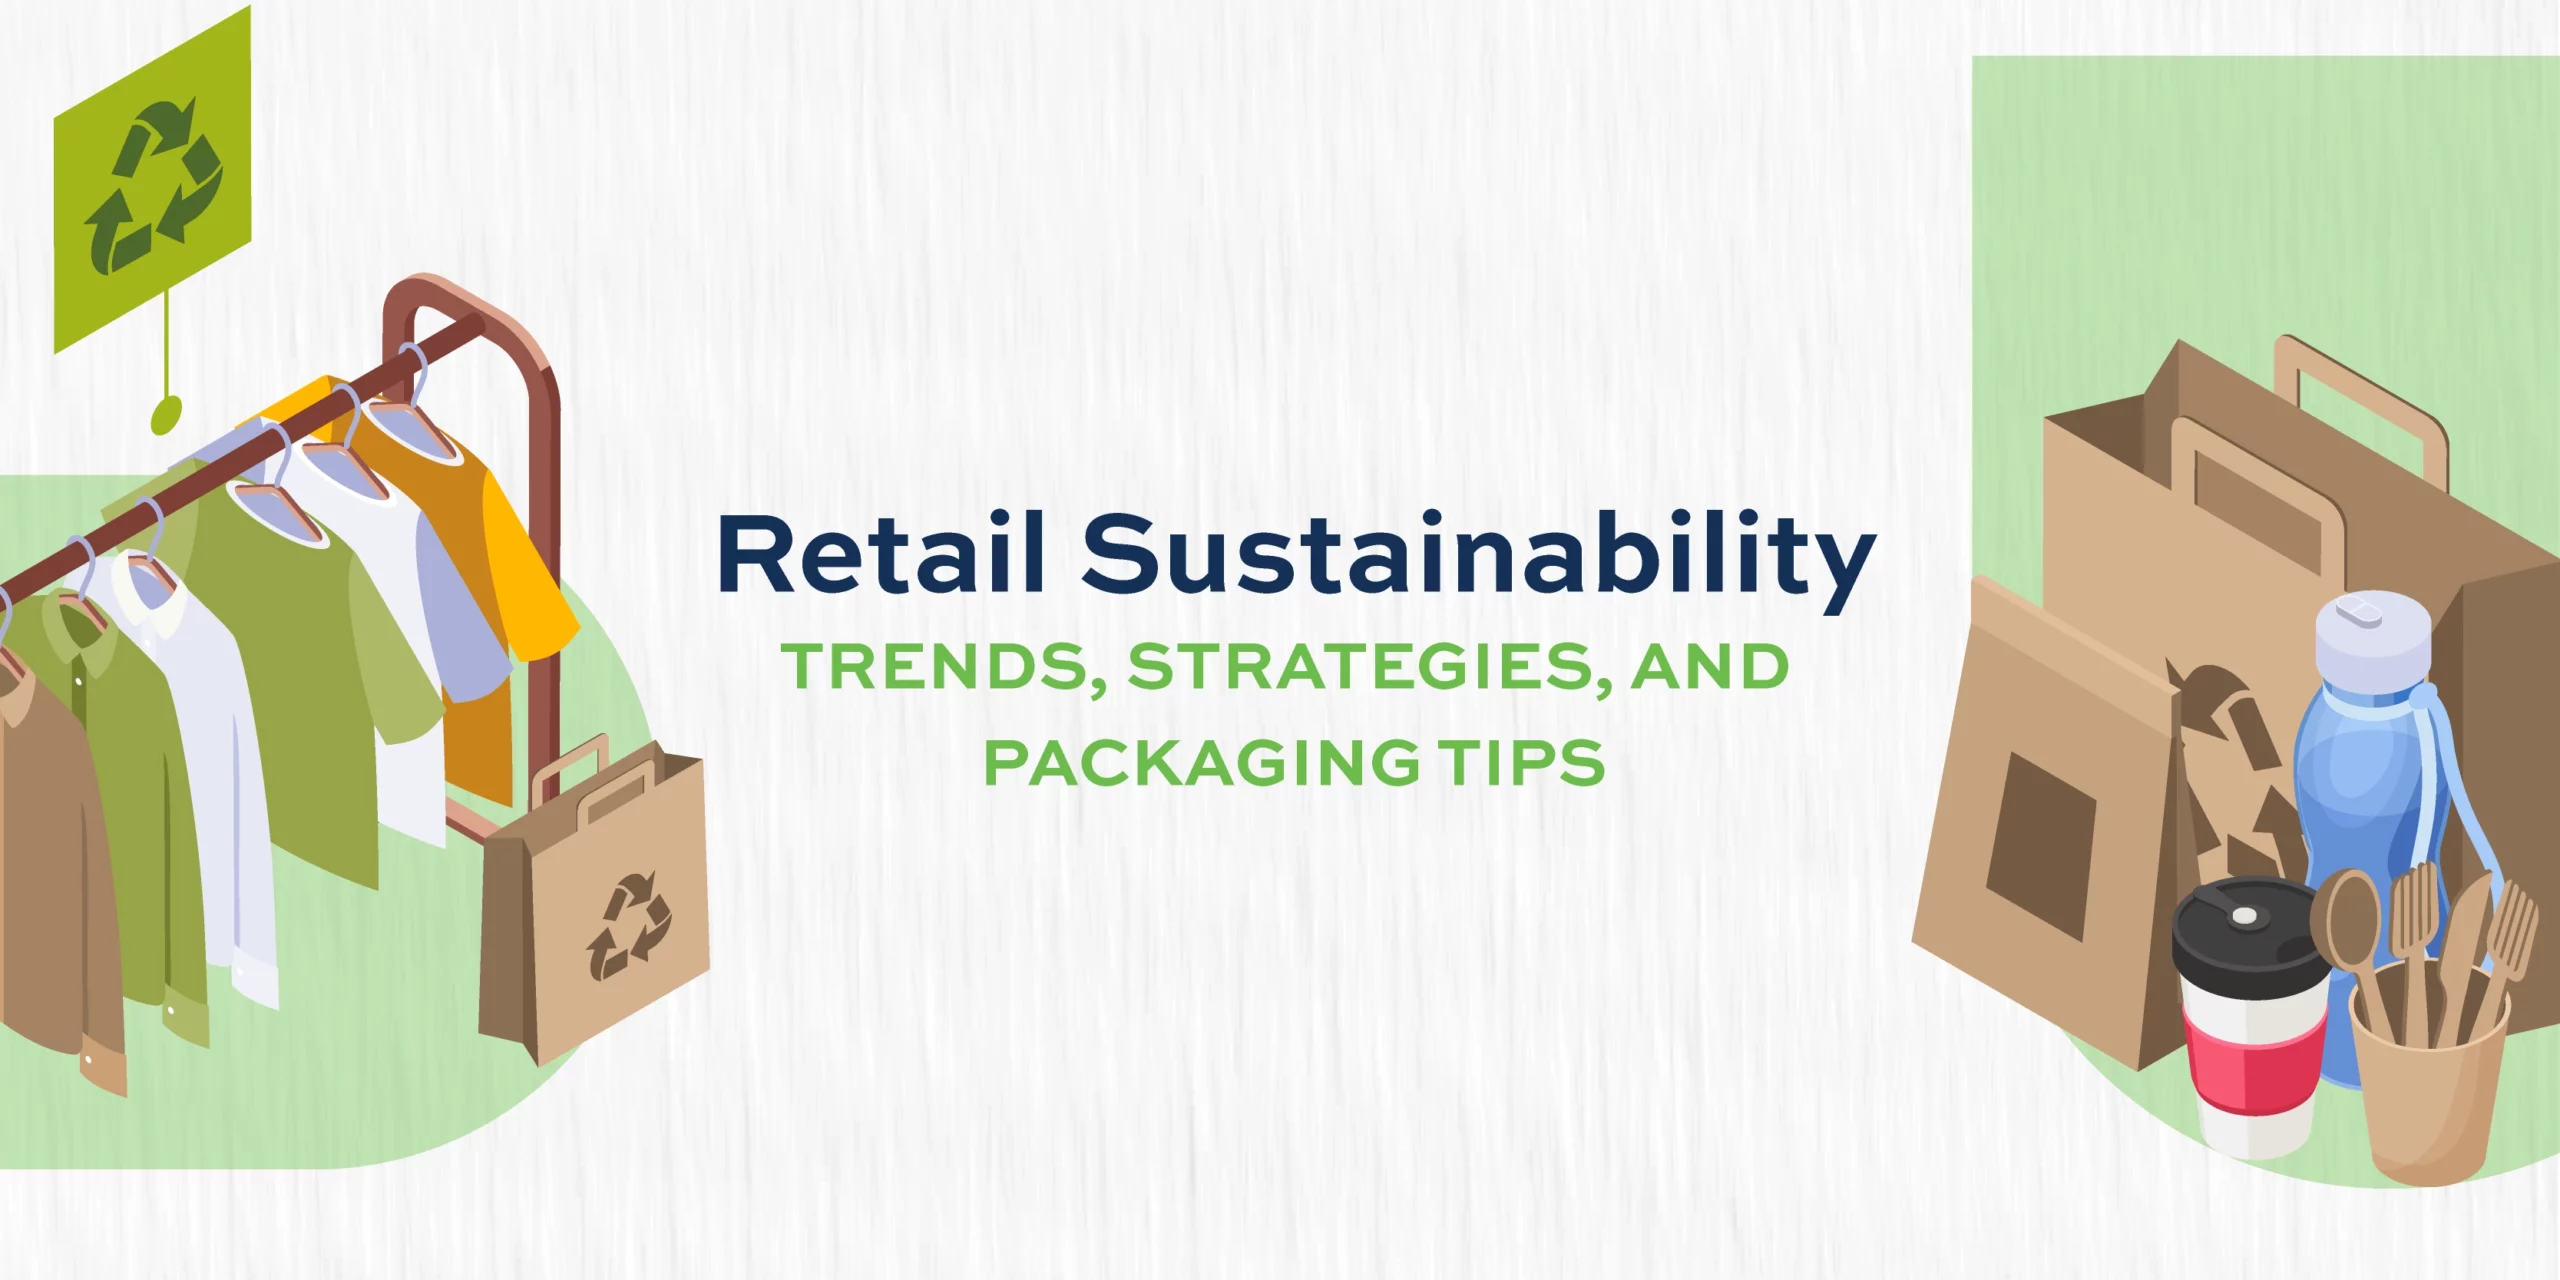 Retail Sustainability: Trends, Strategies, and Packaging Tips